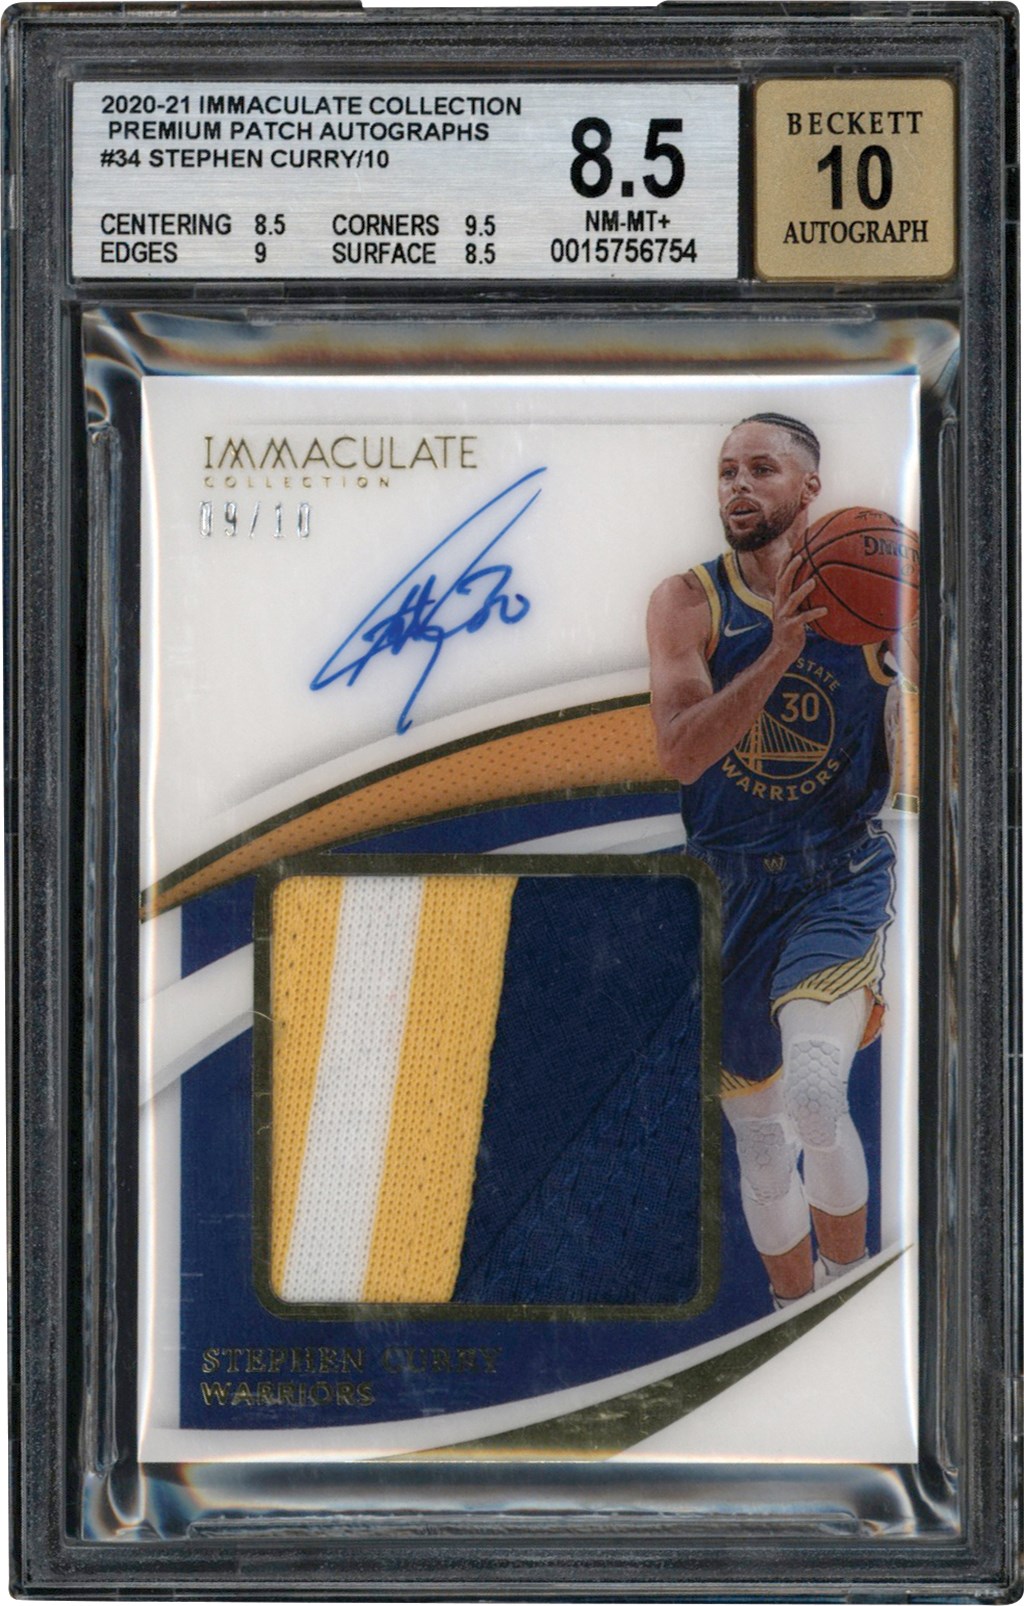 - 2020-2021 Immaculate Collection Basketball Premium Patch #34 Stephen Curry Game Used Patch Autograph #9/10 BGS NM-MT+ 8.5 Auto 10